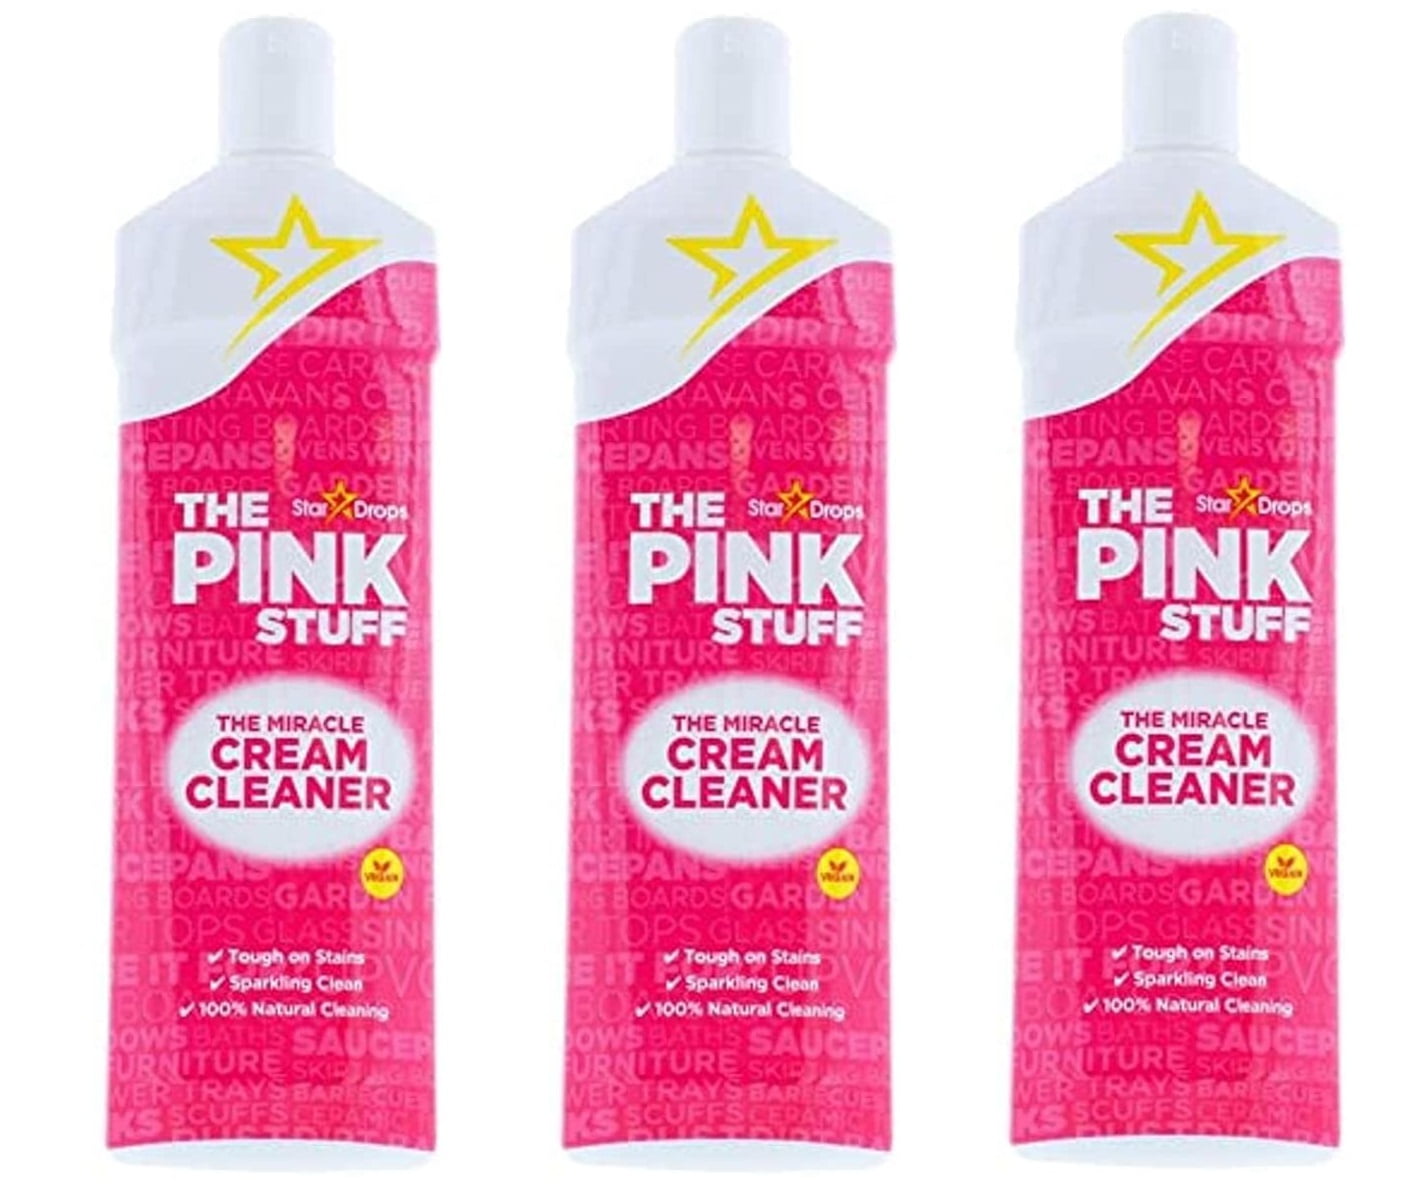 Stardrops The Pink Stuff The Miracle Crème nettoyante 500 ml : :  Epicerie